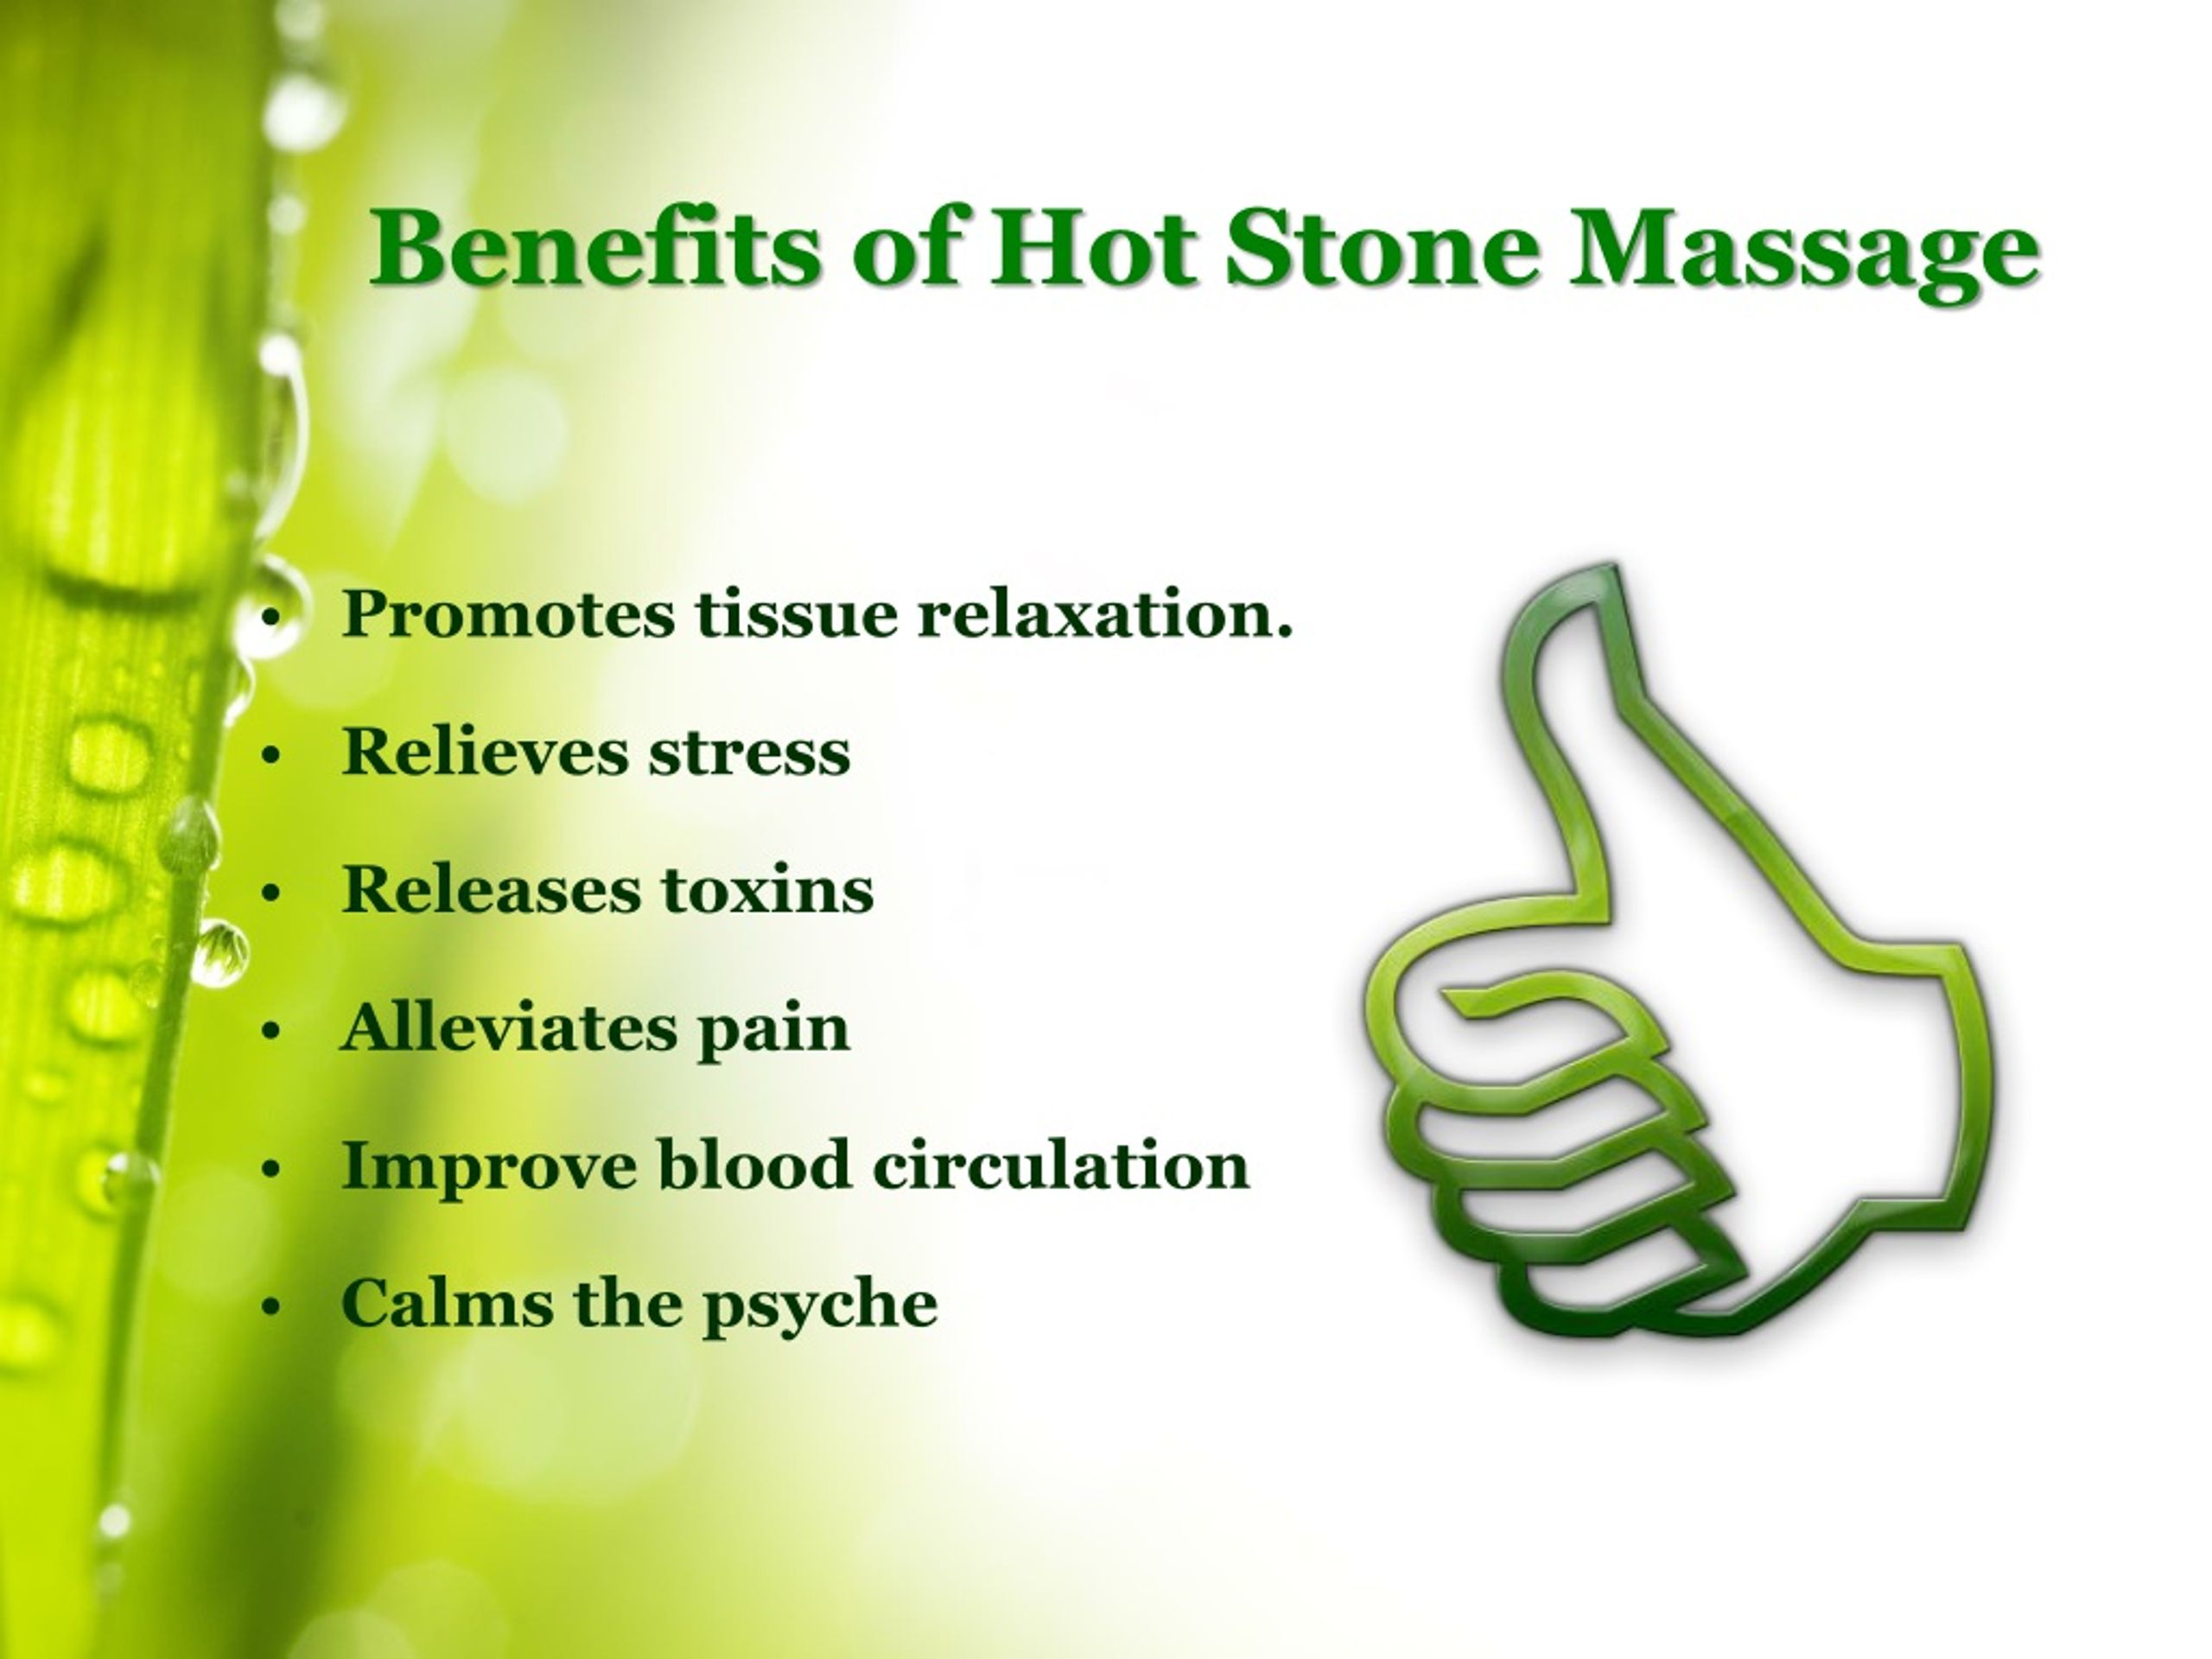 Ppt Get Hot Stone Massage In Brisbane To Relieve Your Stress